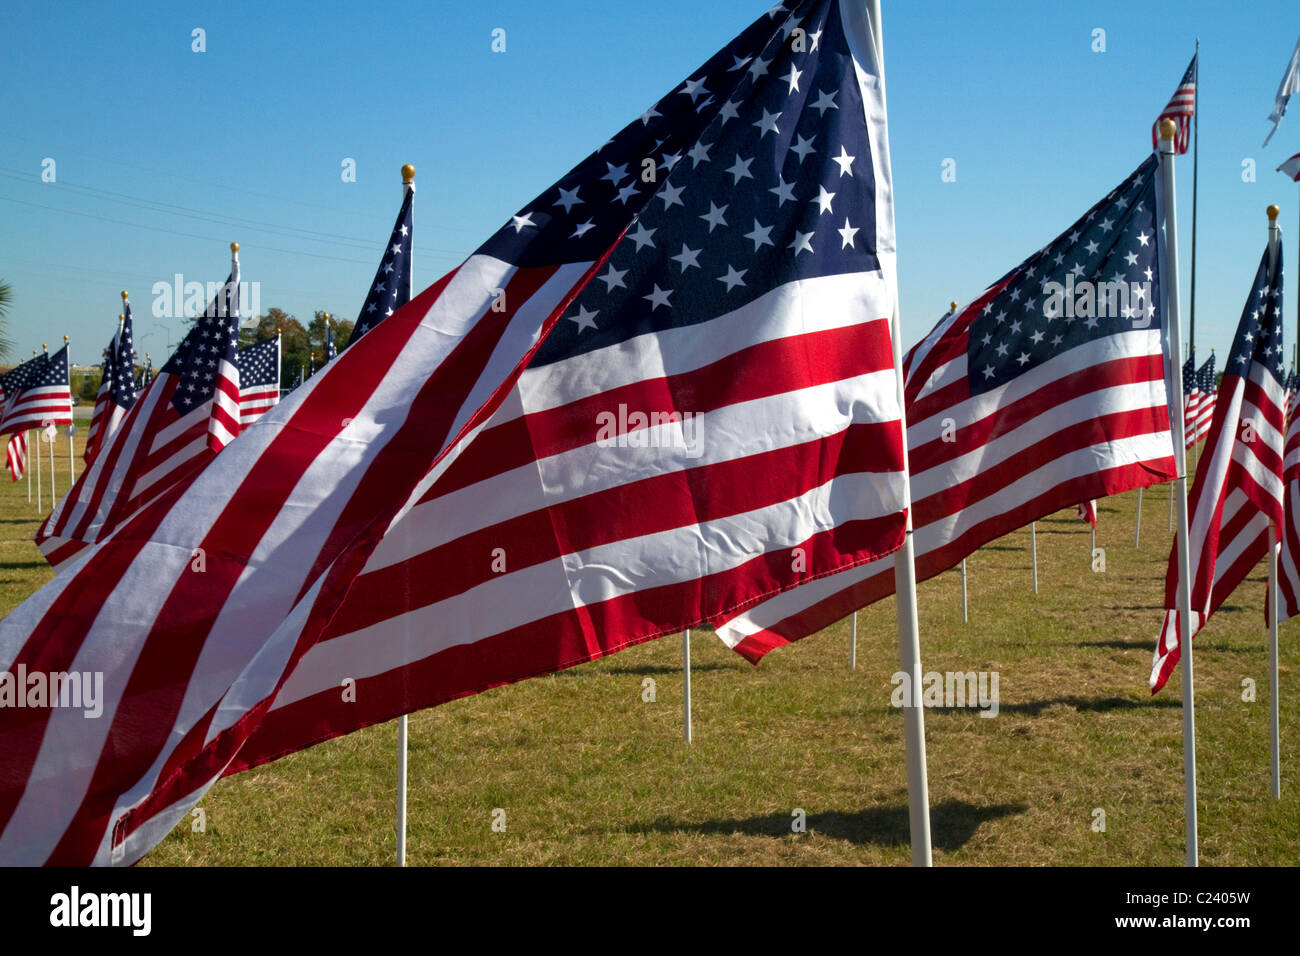 United States flags on display in honor of Veteran's Dat at Battleship Memorial Park, Mobile, Alabama, USA. Stock Photo